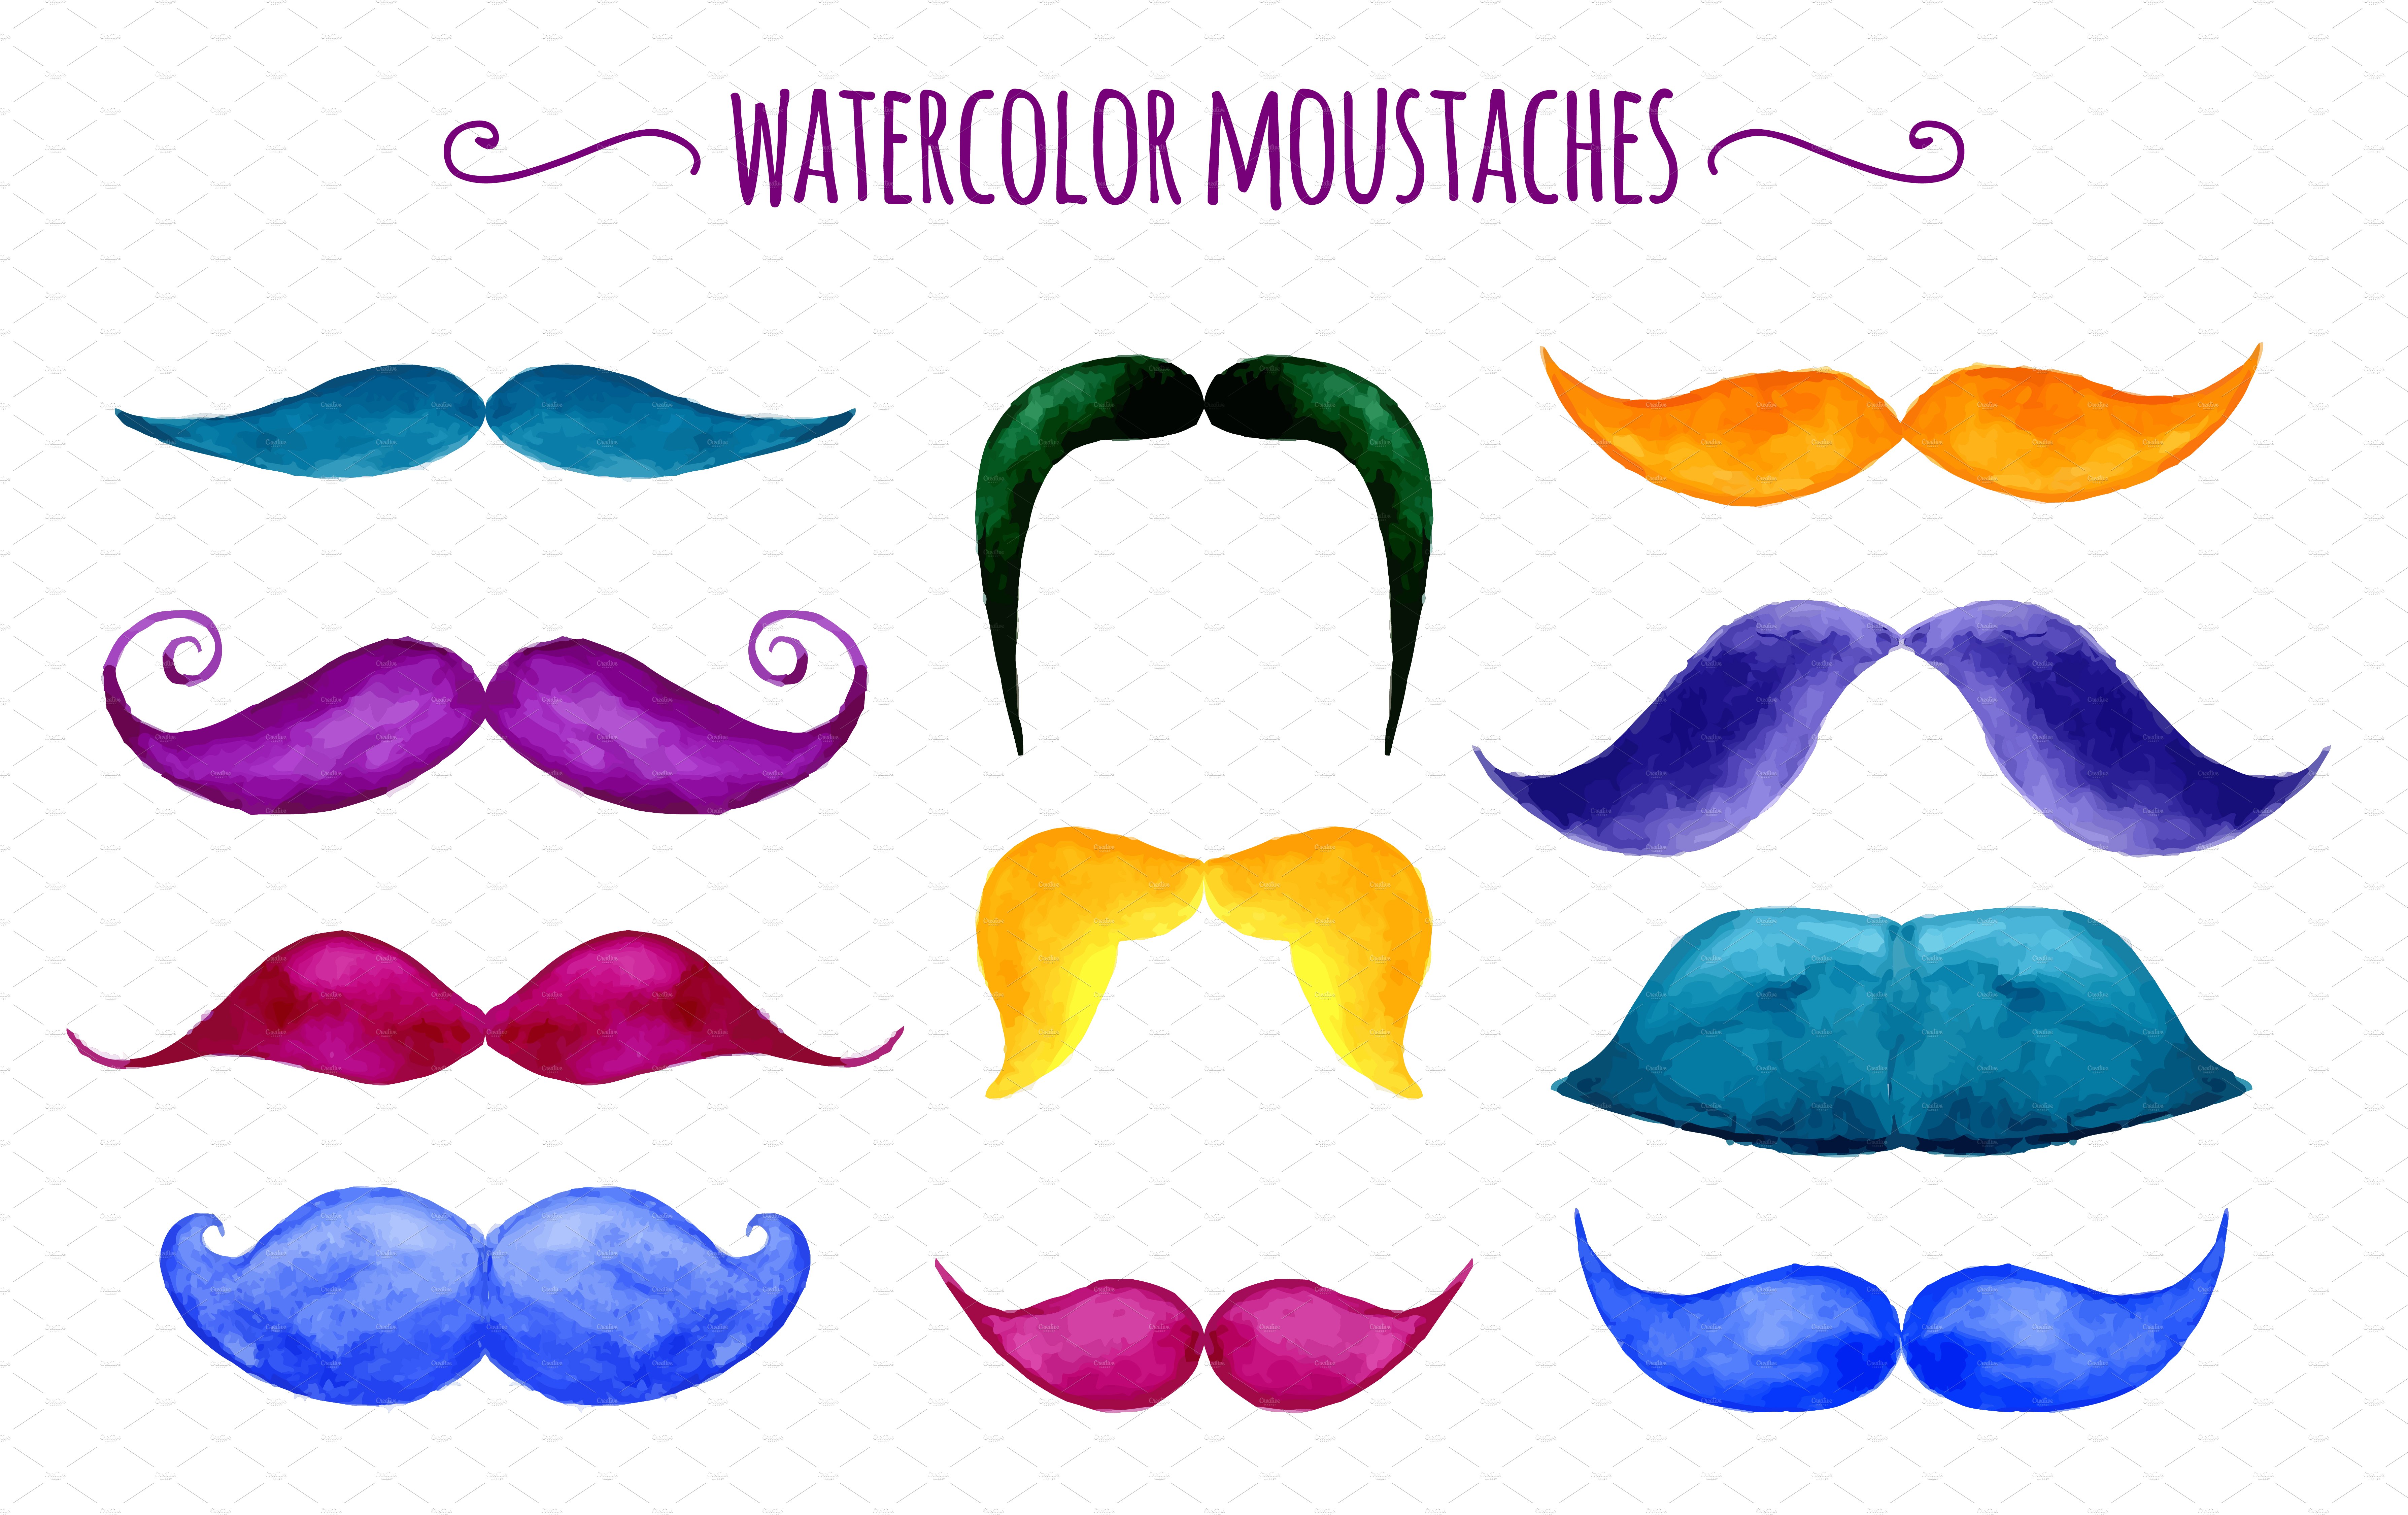 Watercolor vector moustaches cover image.